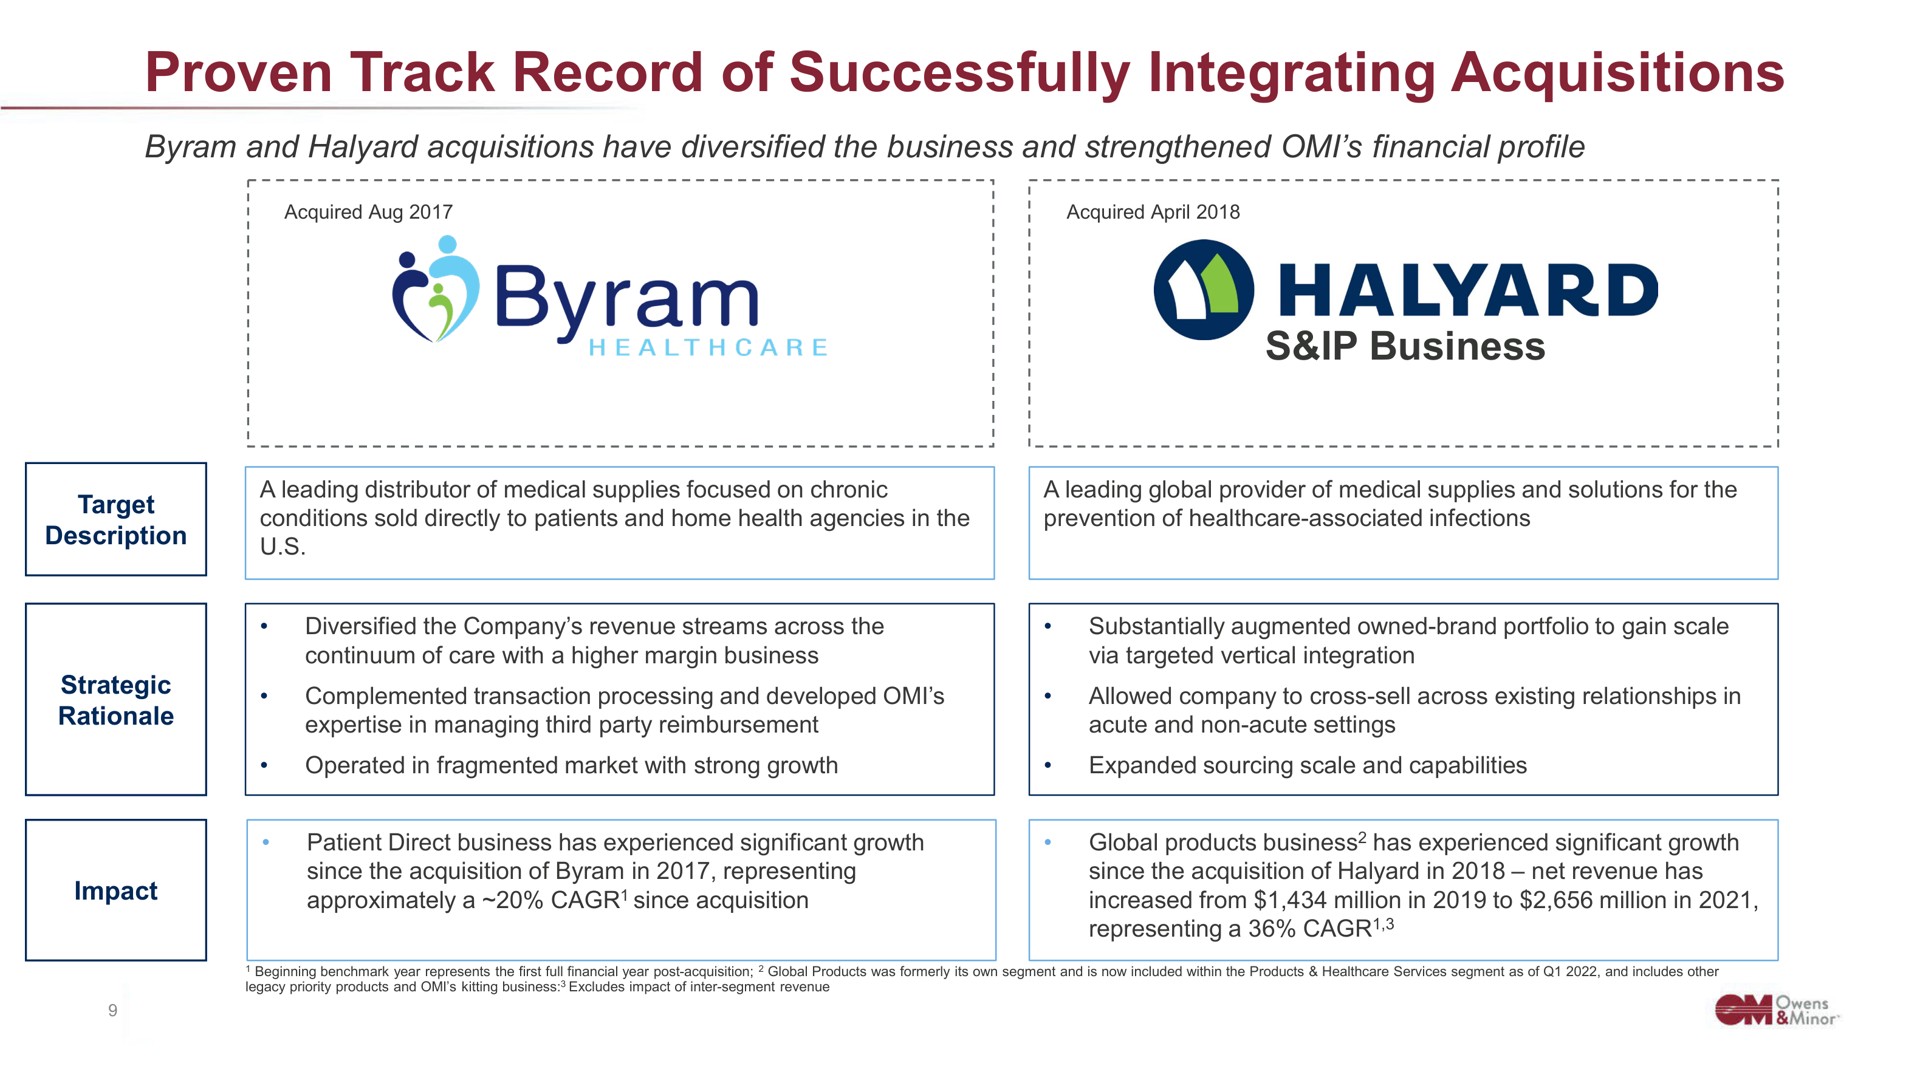 proven track record of successfully integrating acquisitions halyard | Owens&Minor